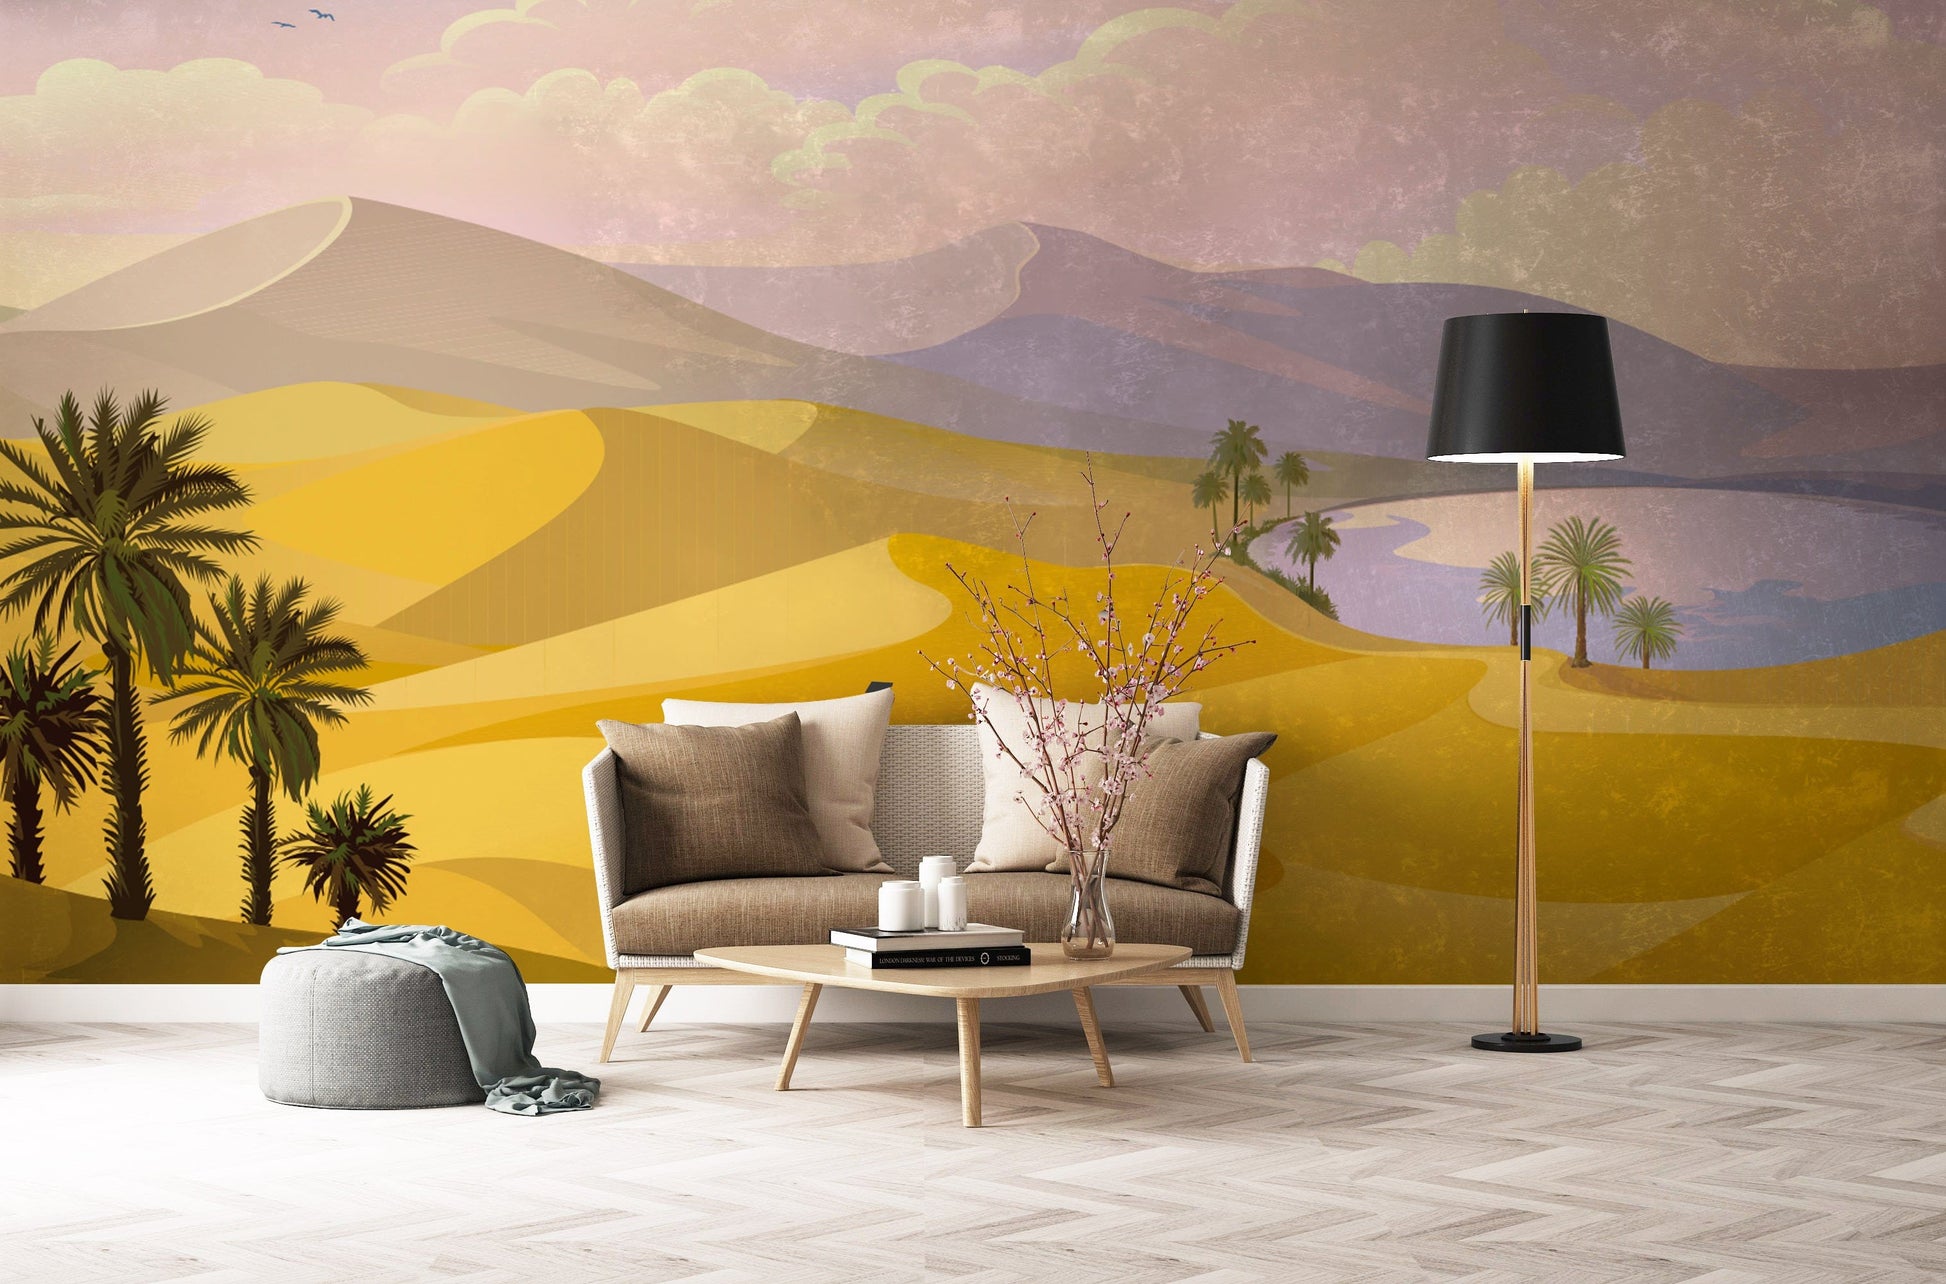 Living Room Decoration Featuring an Ombre Desert Wall Mural